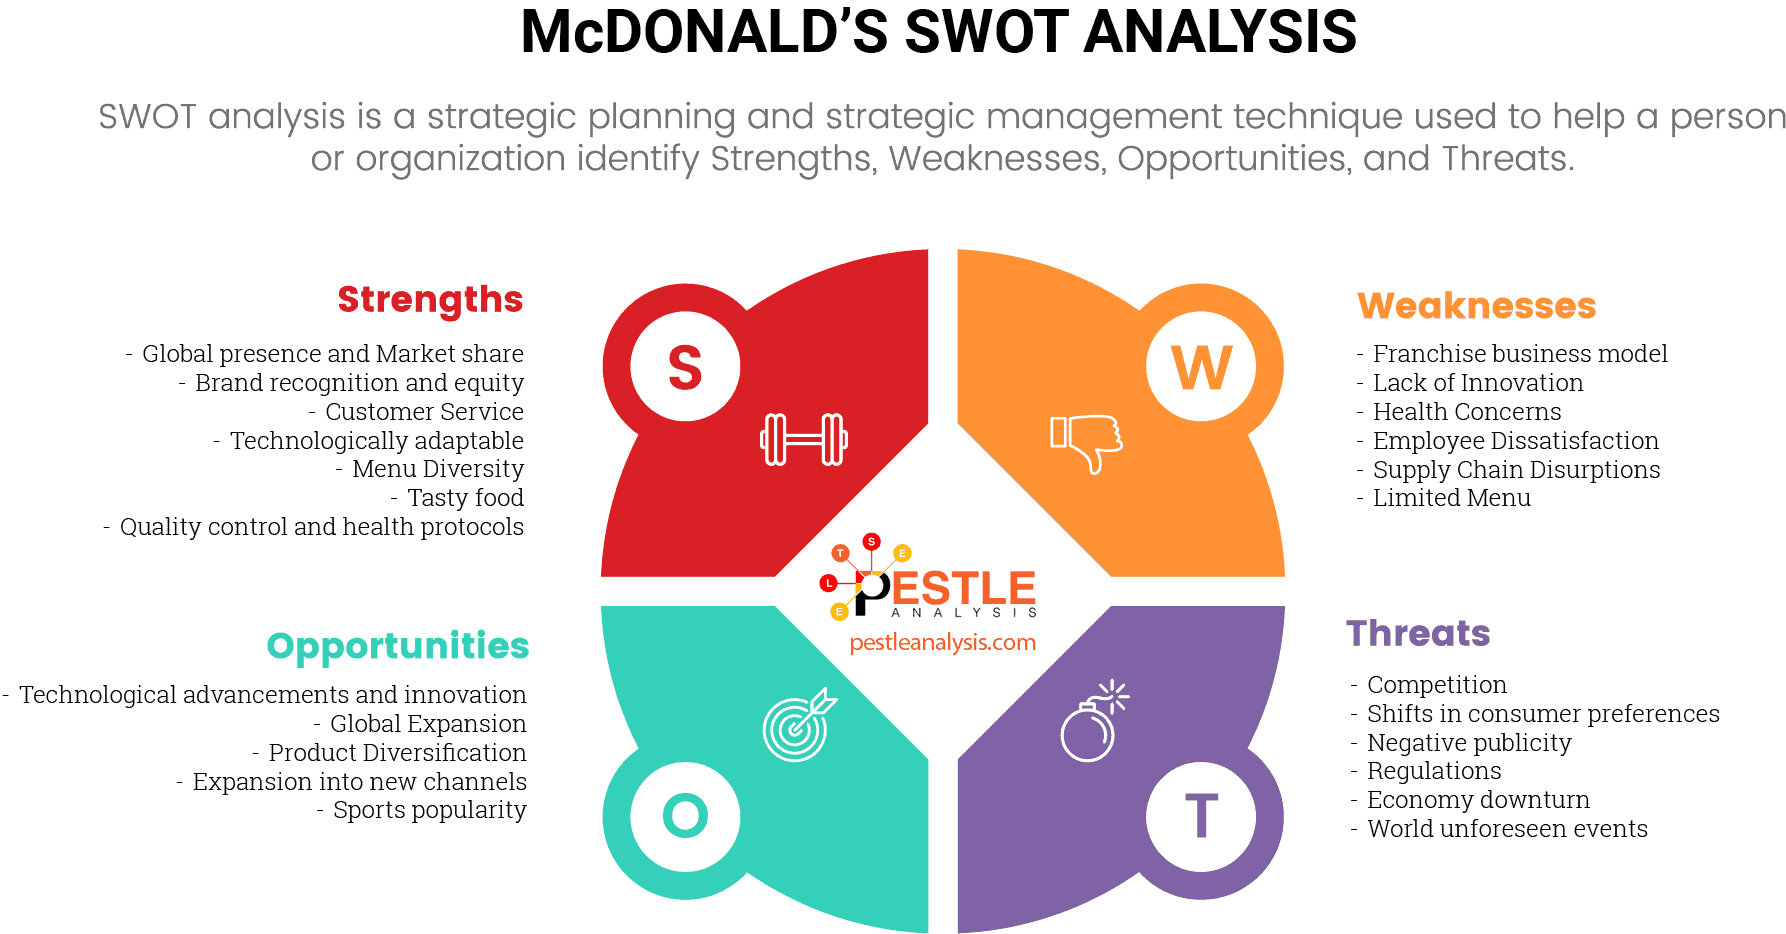 SWOT analysis is one of the most popular business analysis tools.